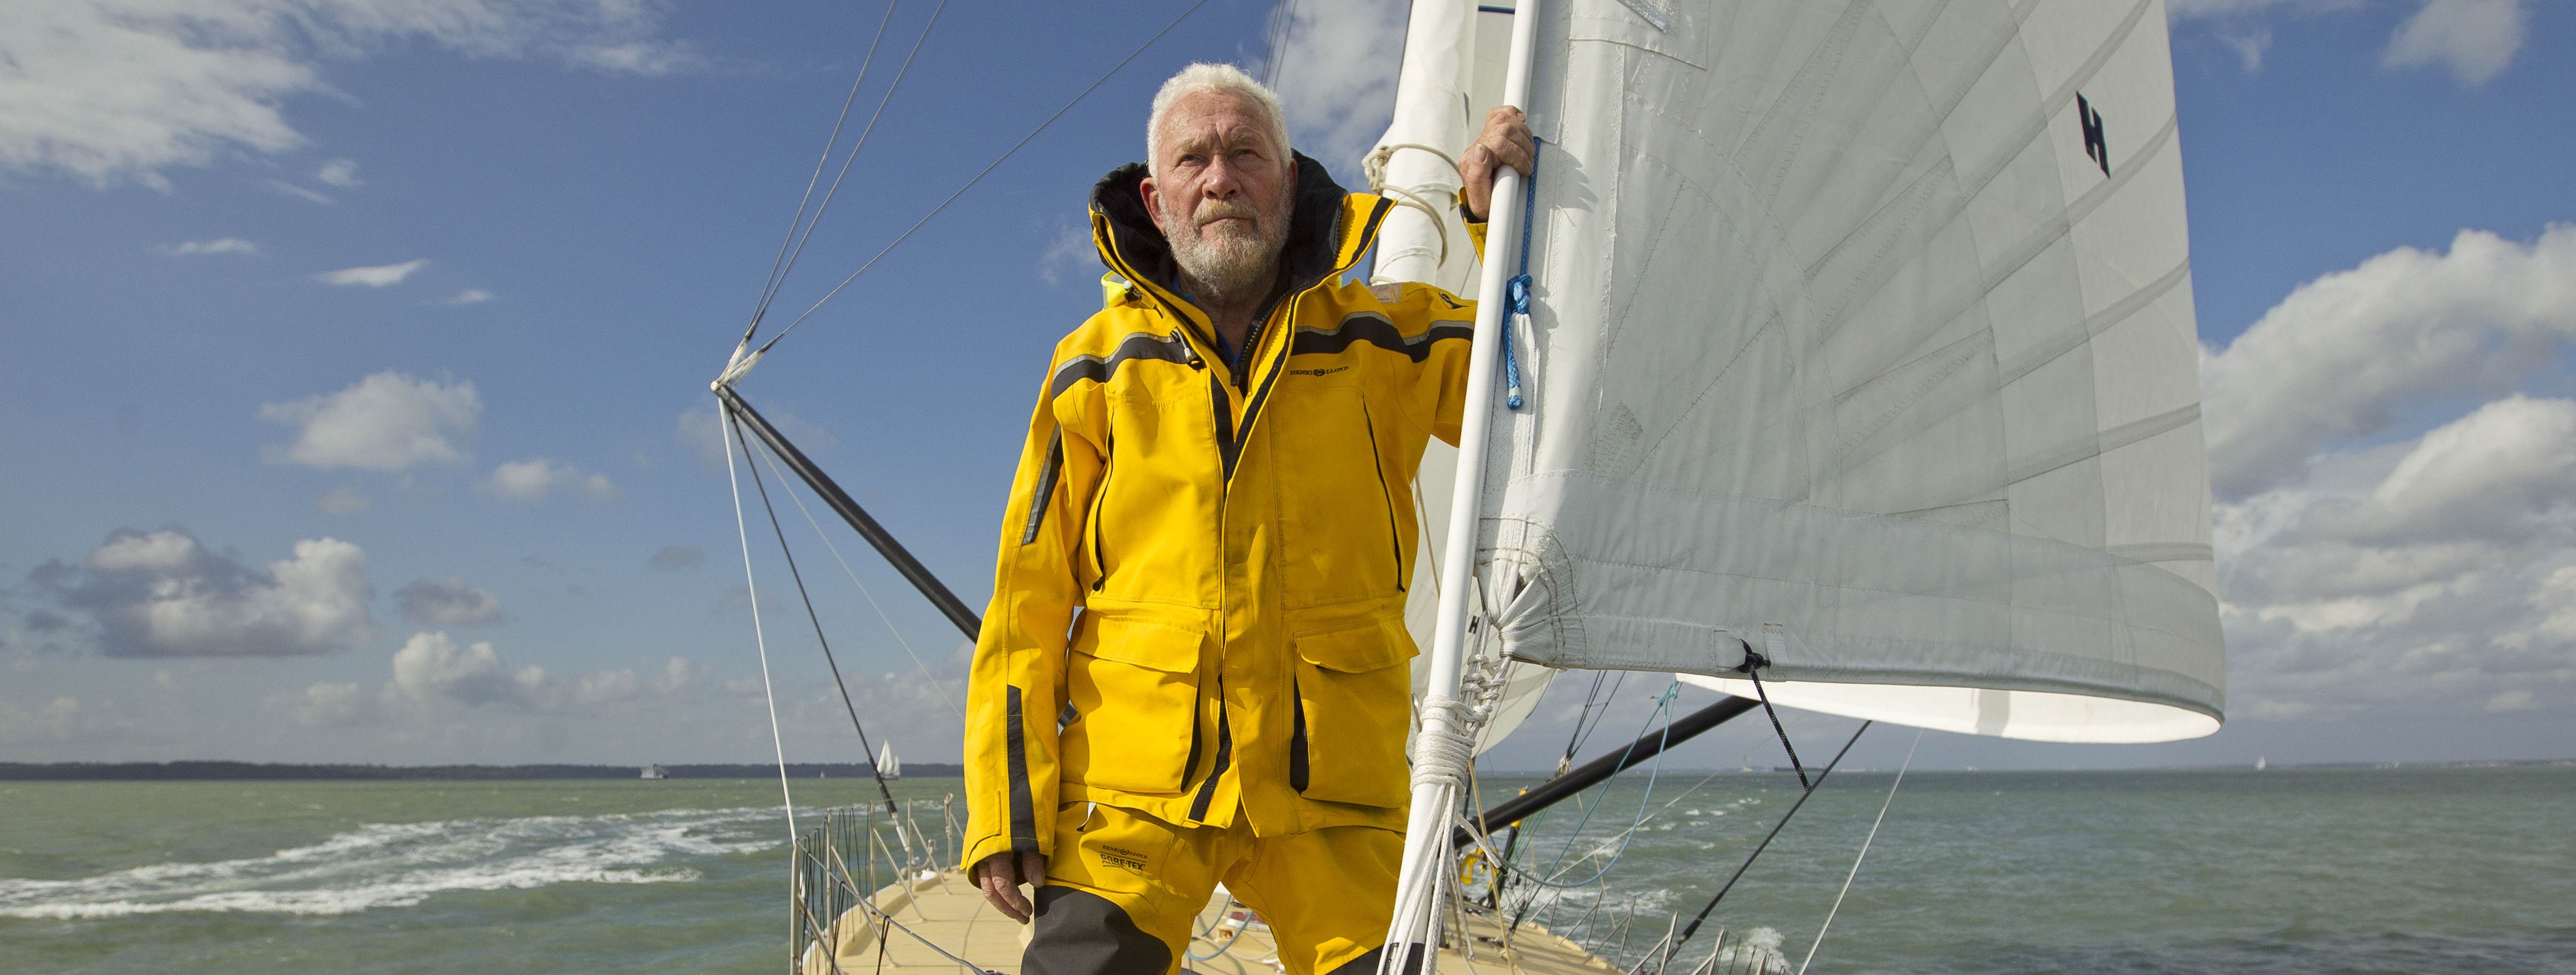 Throwback: One year on since Sir Robin Knox-Johnston's victorious Route du Rhum campaign 